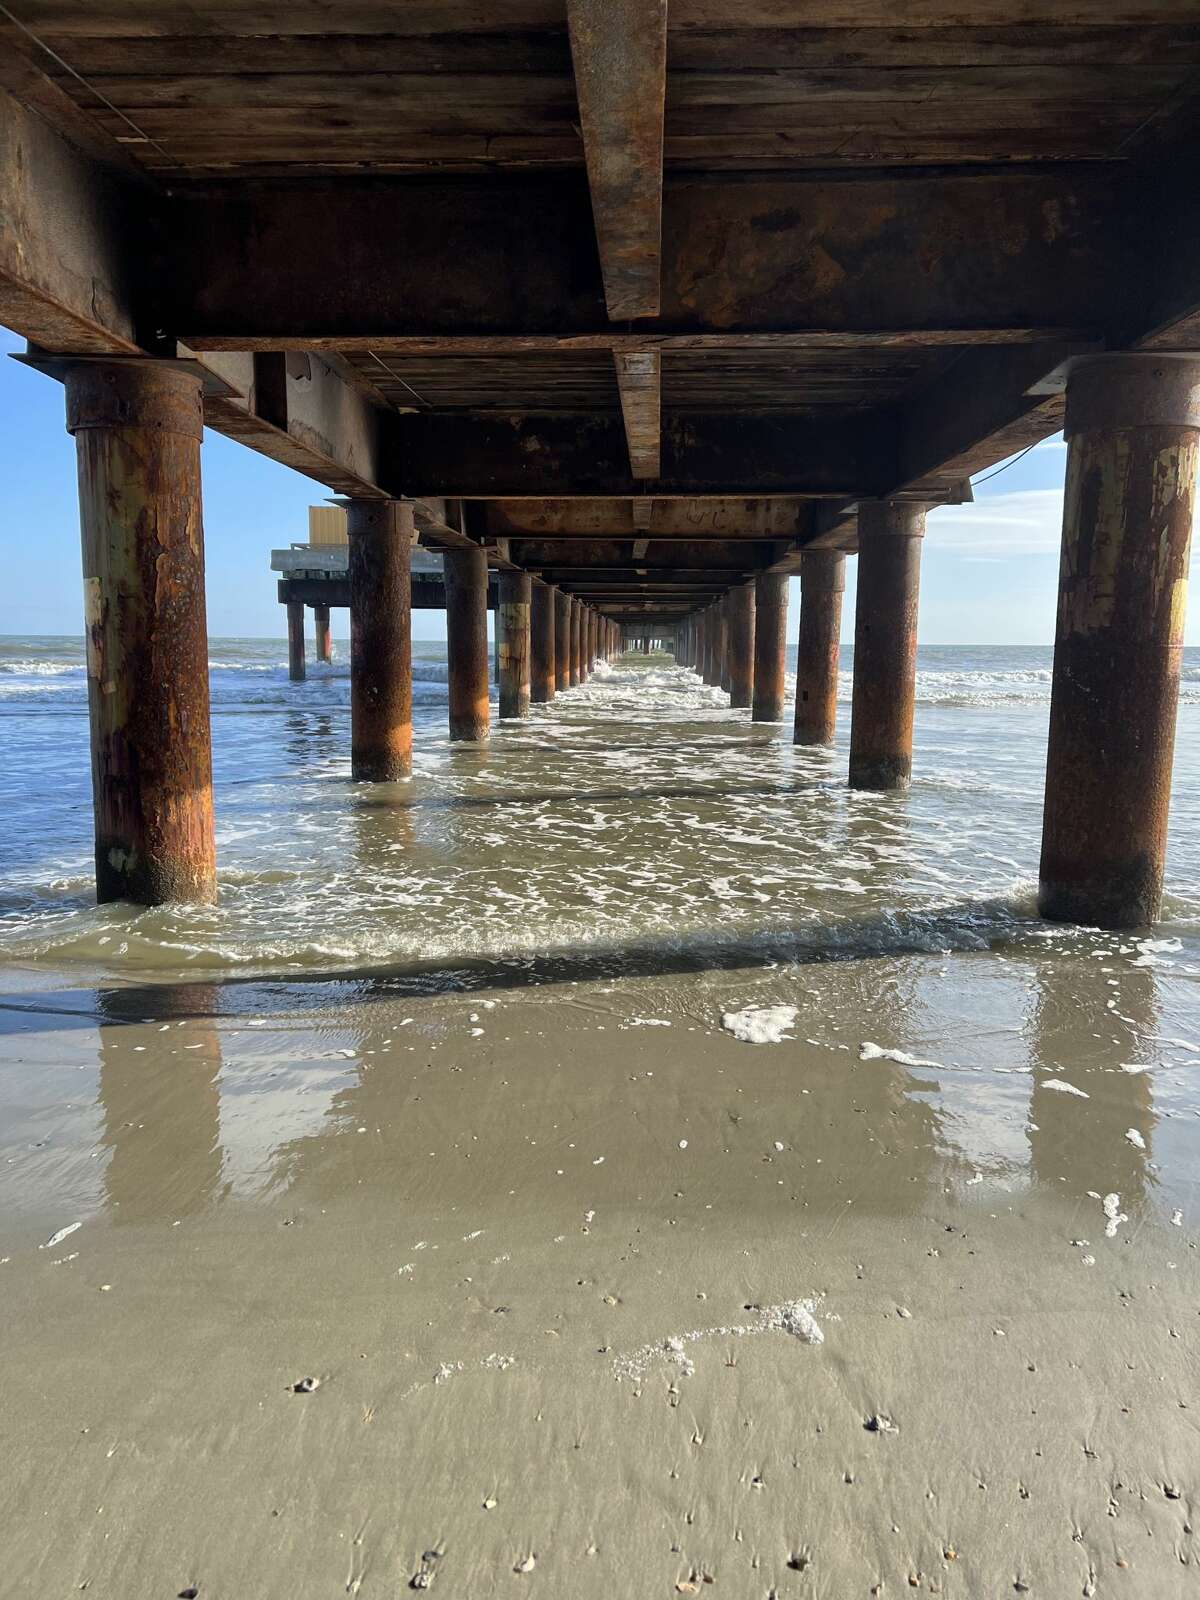 If you need a break from the Charleston city life, check out Folly Beach.